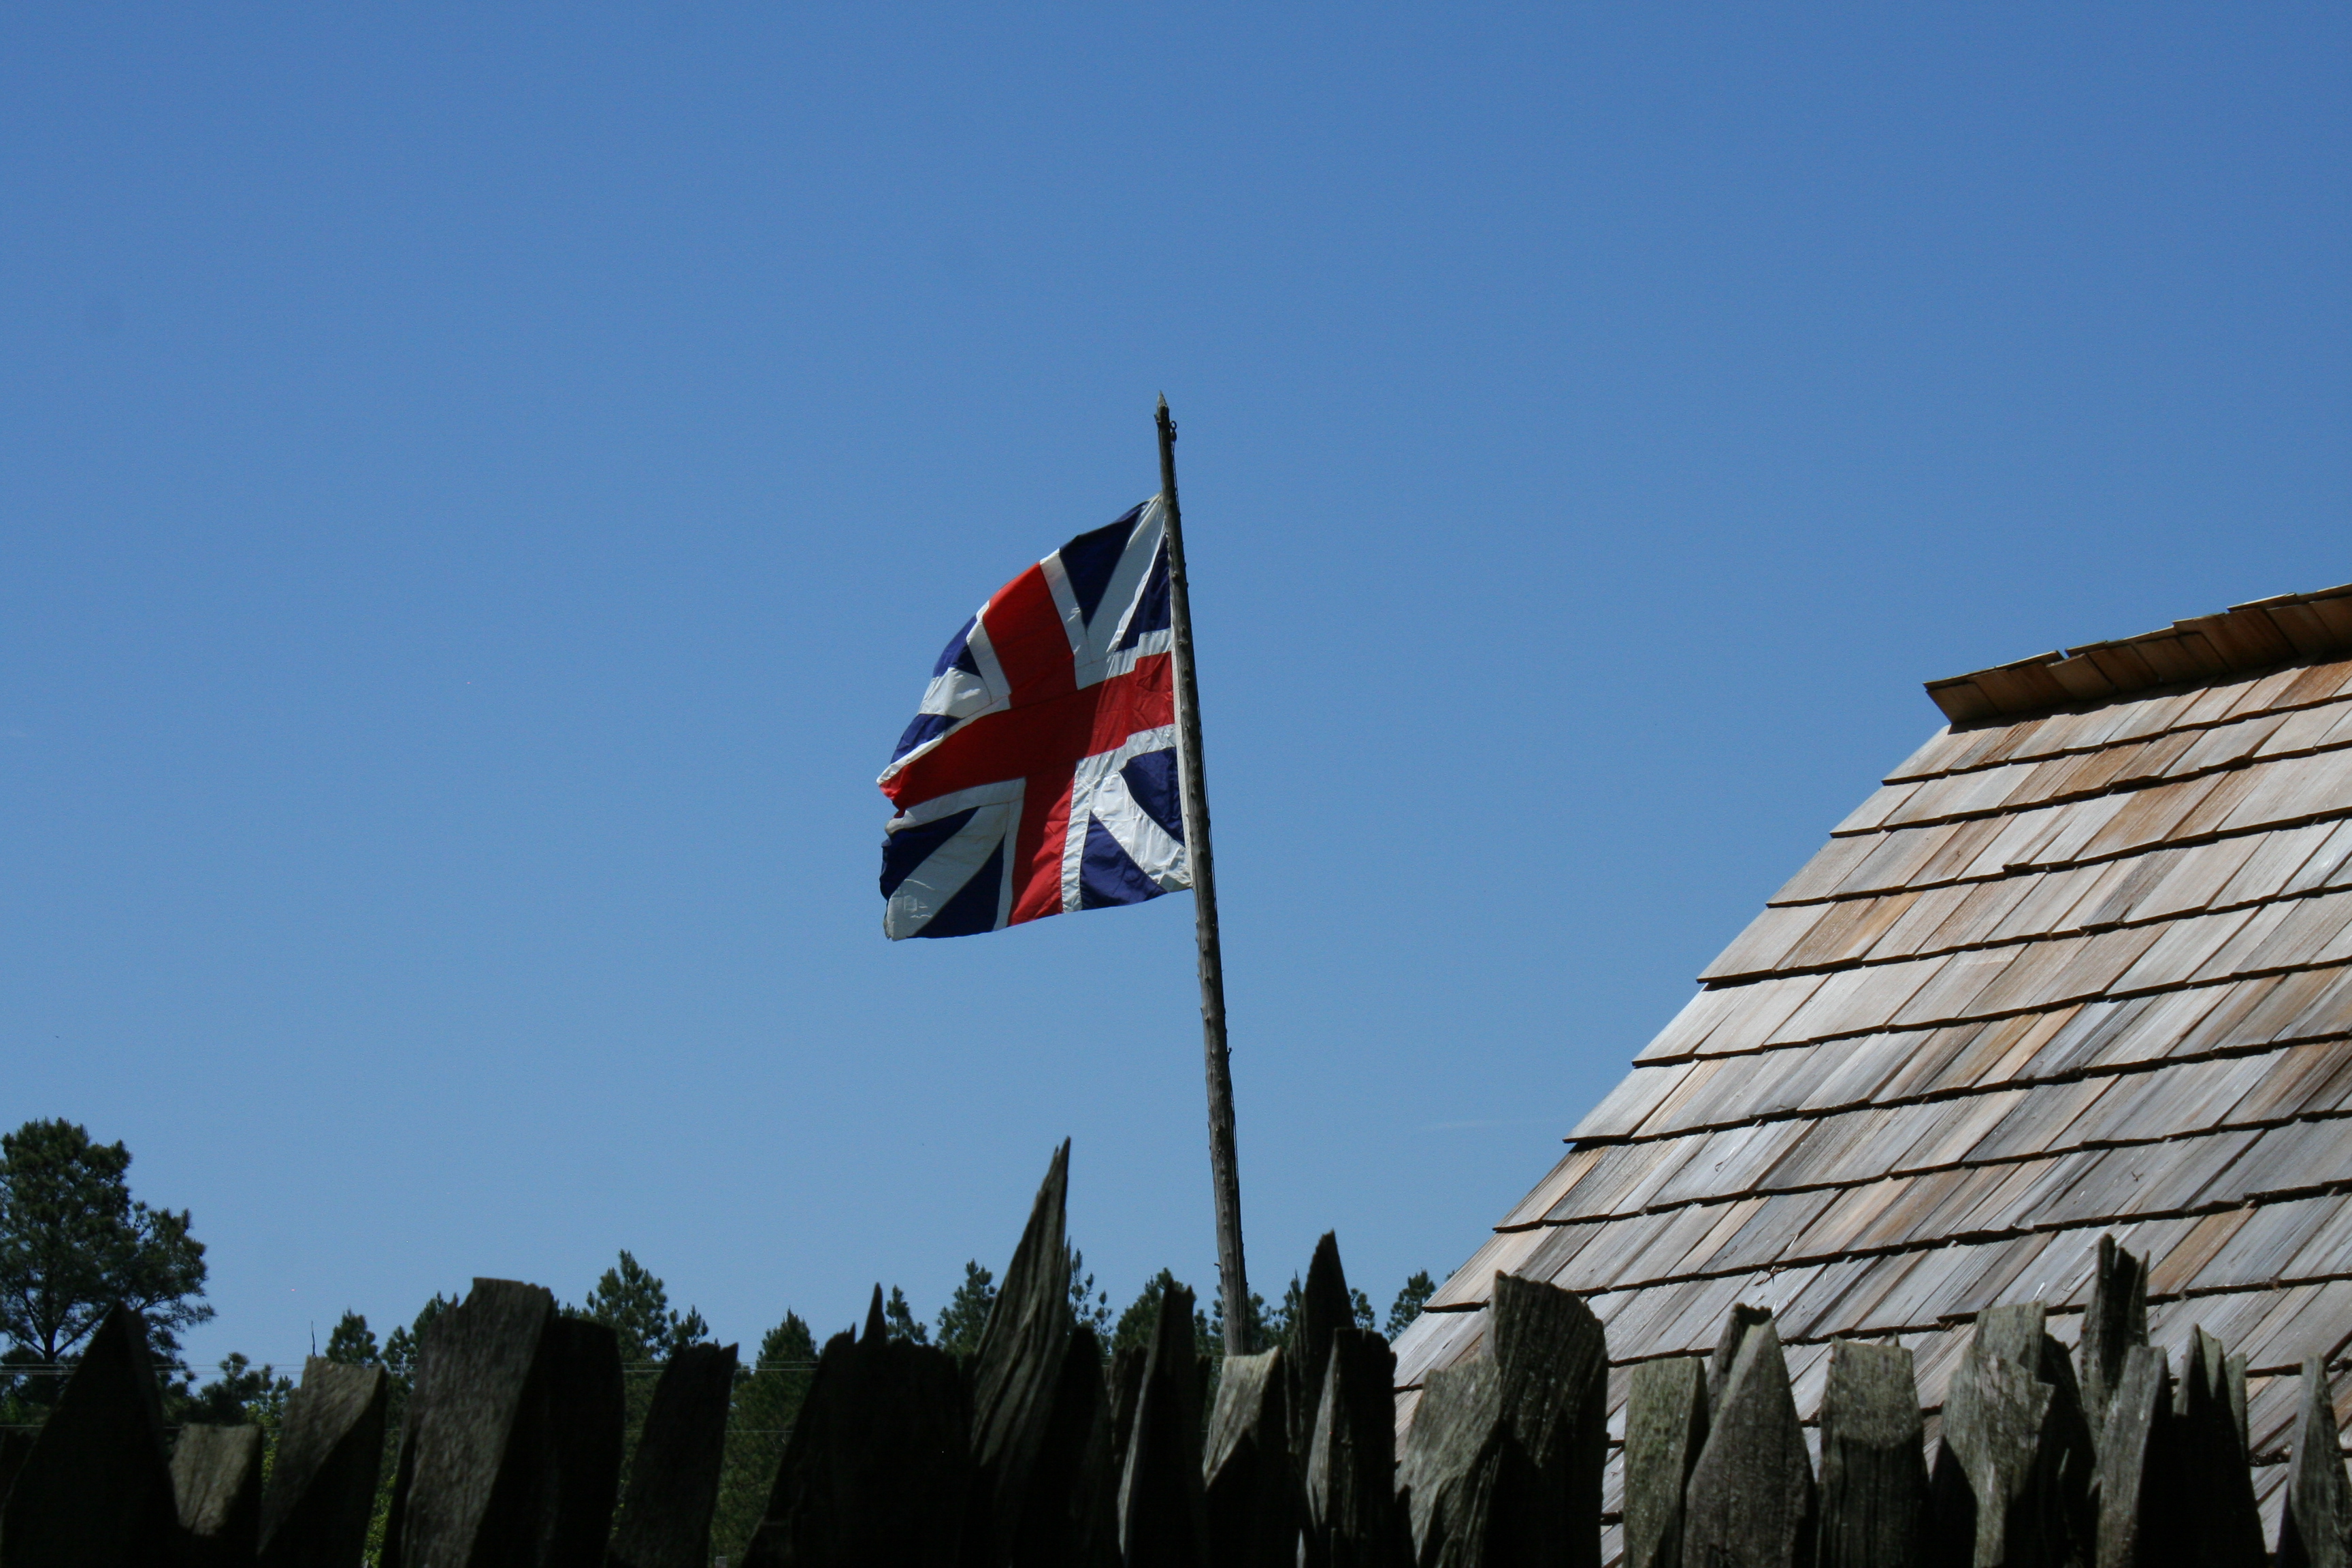 A British flag flies over the stockade fort.